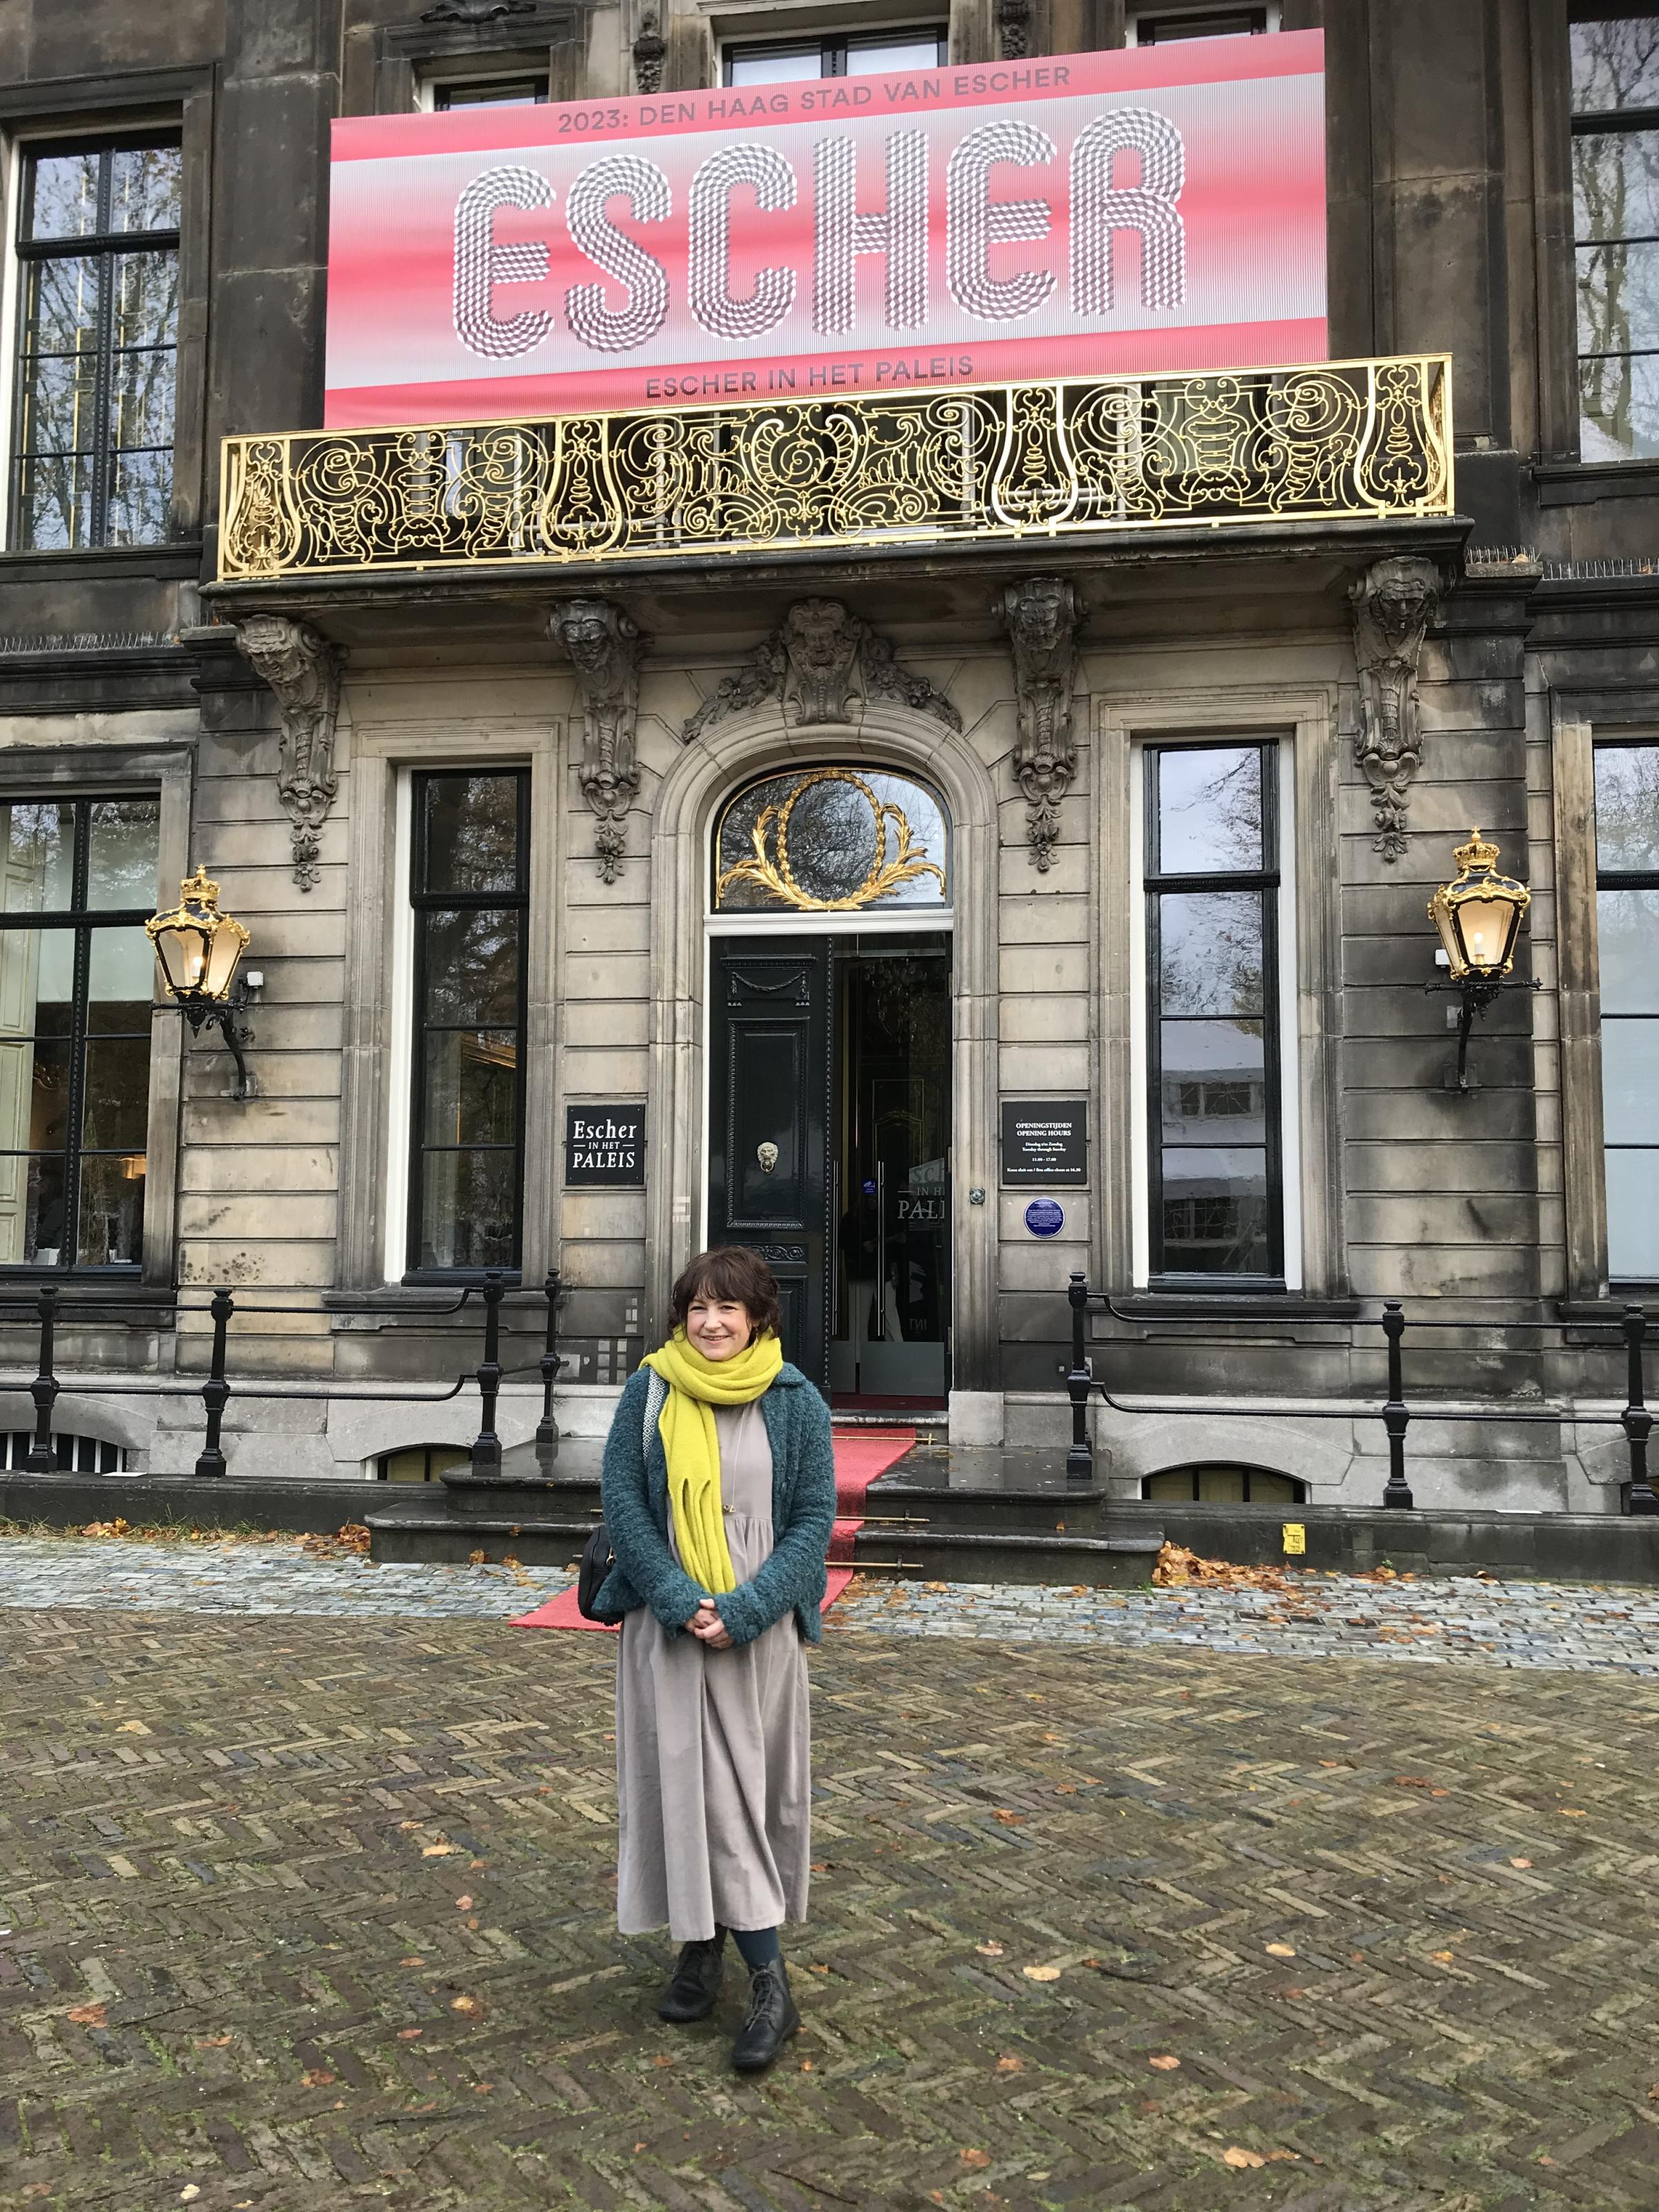 Louisa Boyd outside Escher in the Palace.